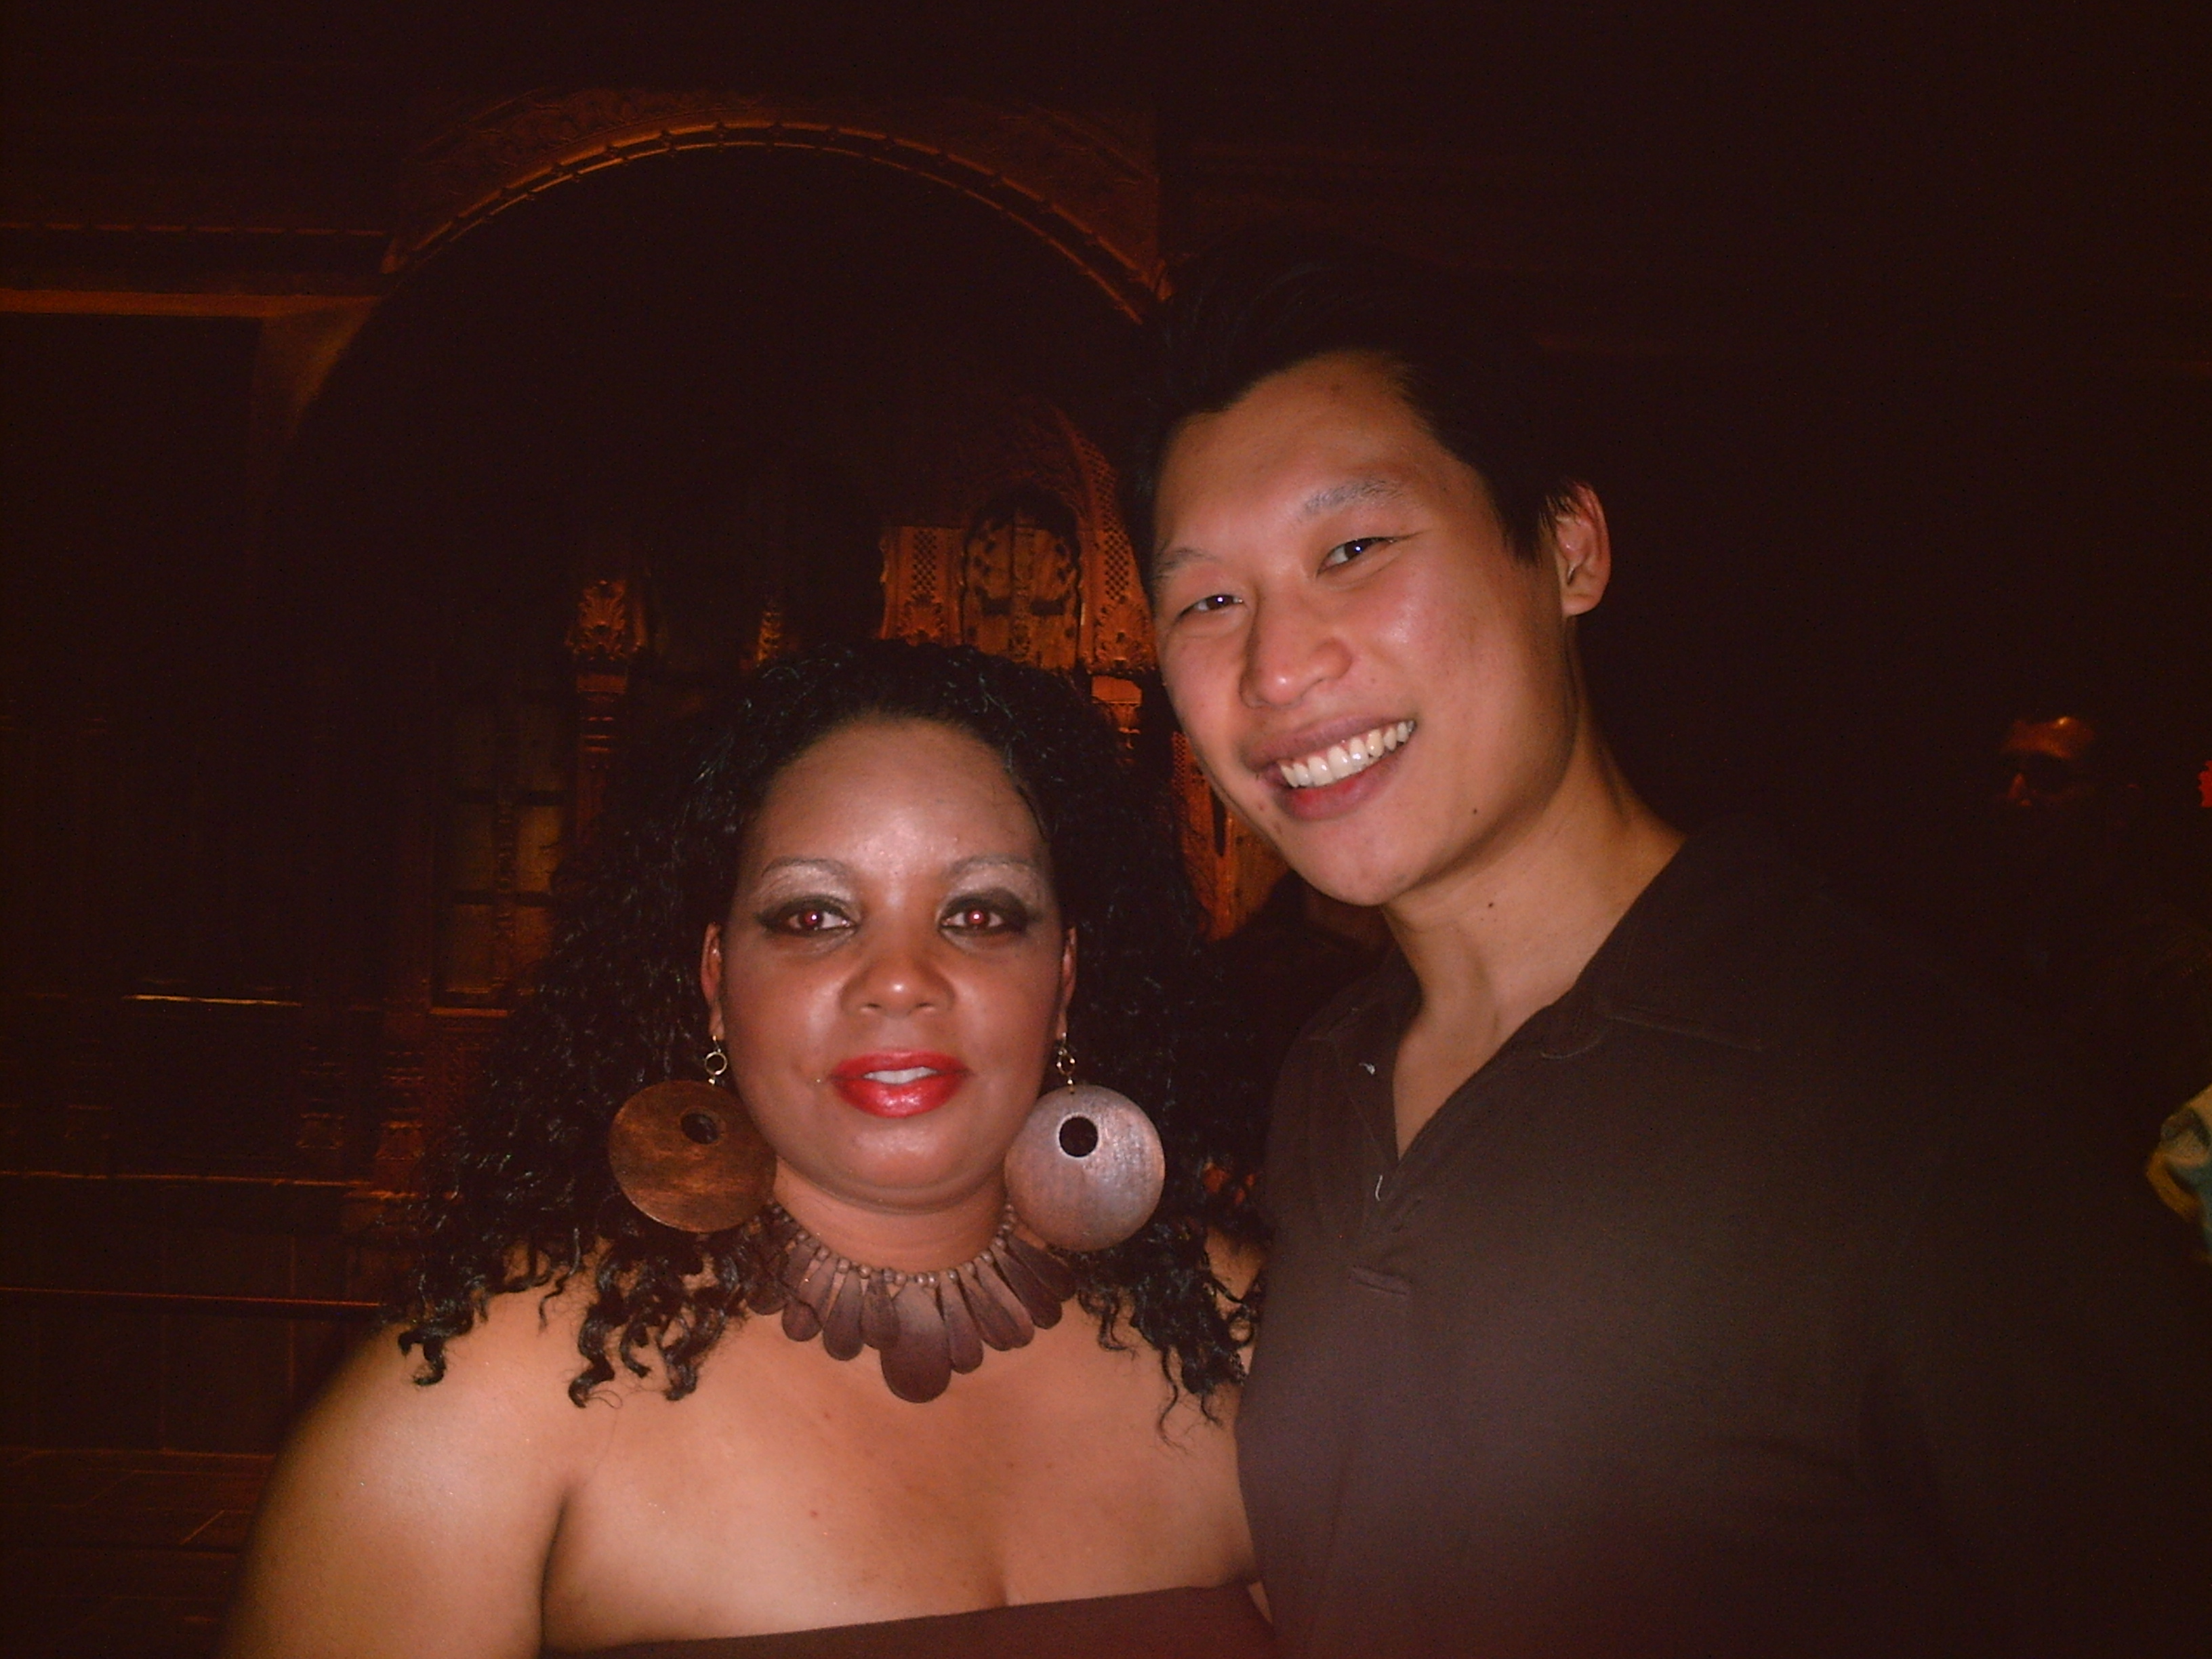 Latrice Butts with Jimmy Tsai @ The Pre-Opening VIP Reception for The Asian Film Festival. Jimmy is an Chinese American he's a very talented Actor/Writer.